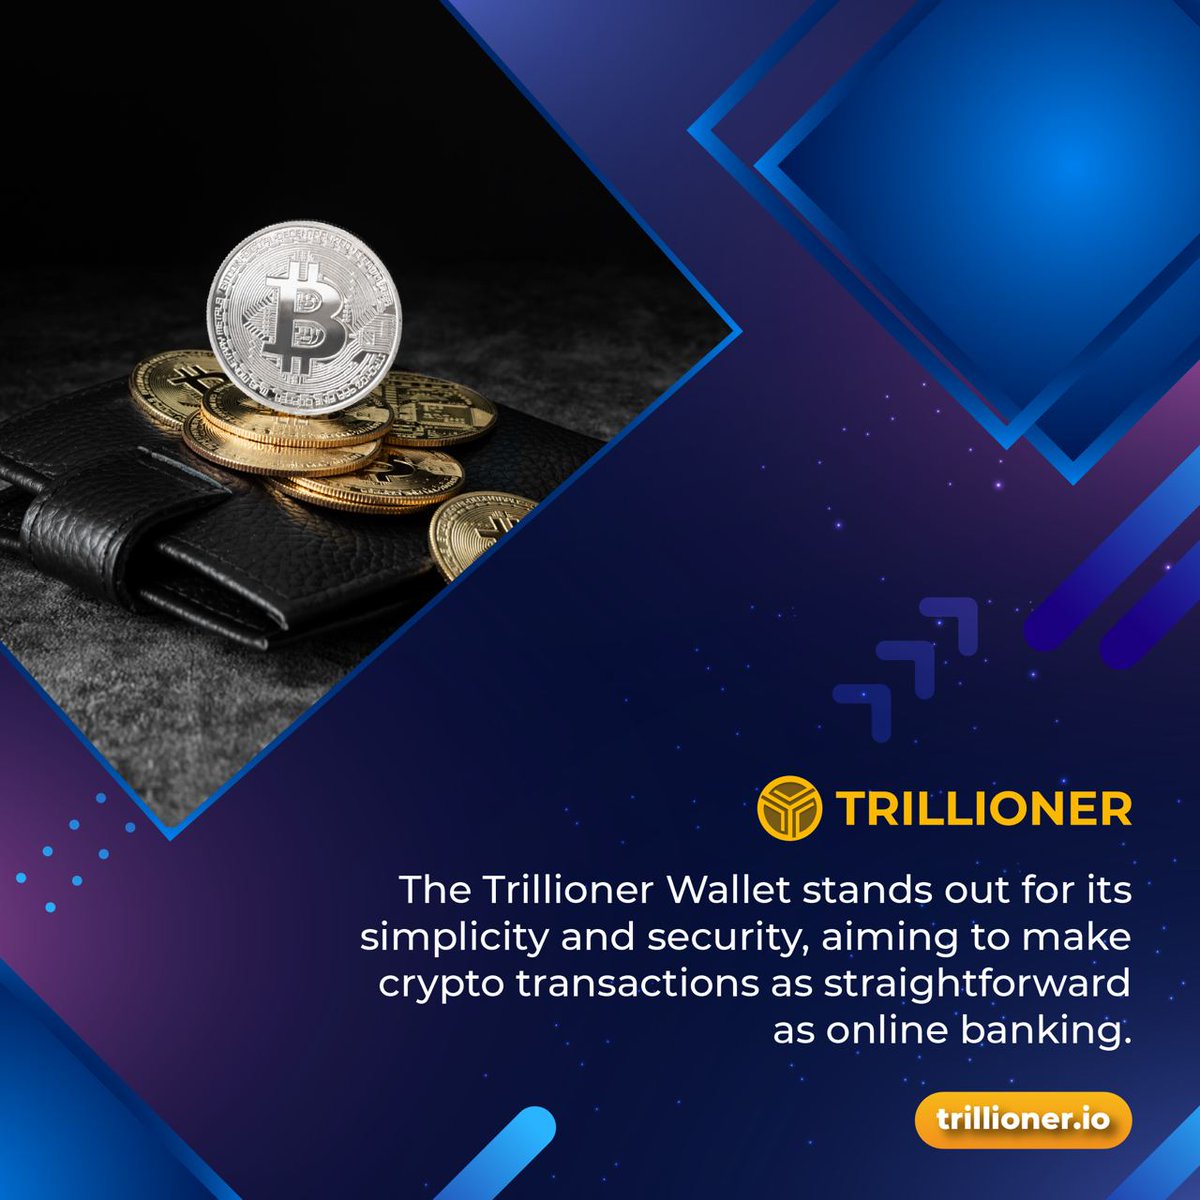 The Trillioner Wallet stands out for its simplicity and security, aiming to make crypto transactions as straightforward as online banking.

#TLC #Trillioner #TLC #cryptocurrency #cryptonews #cryptotrading #Blockchain